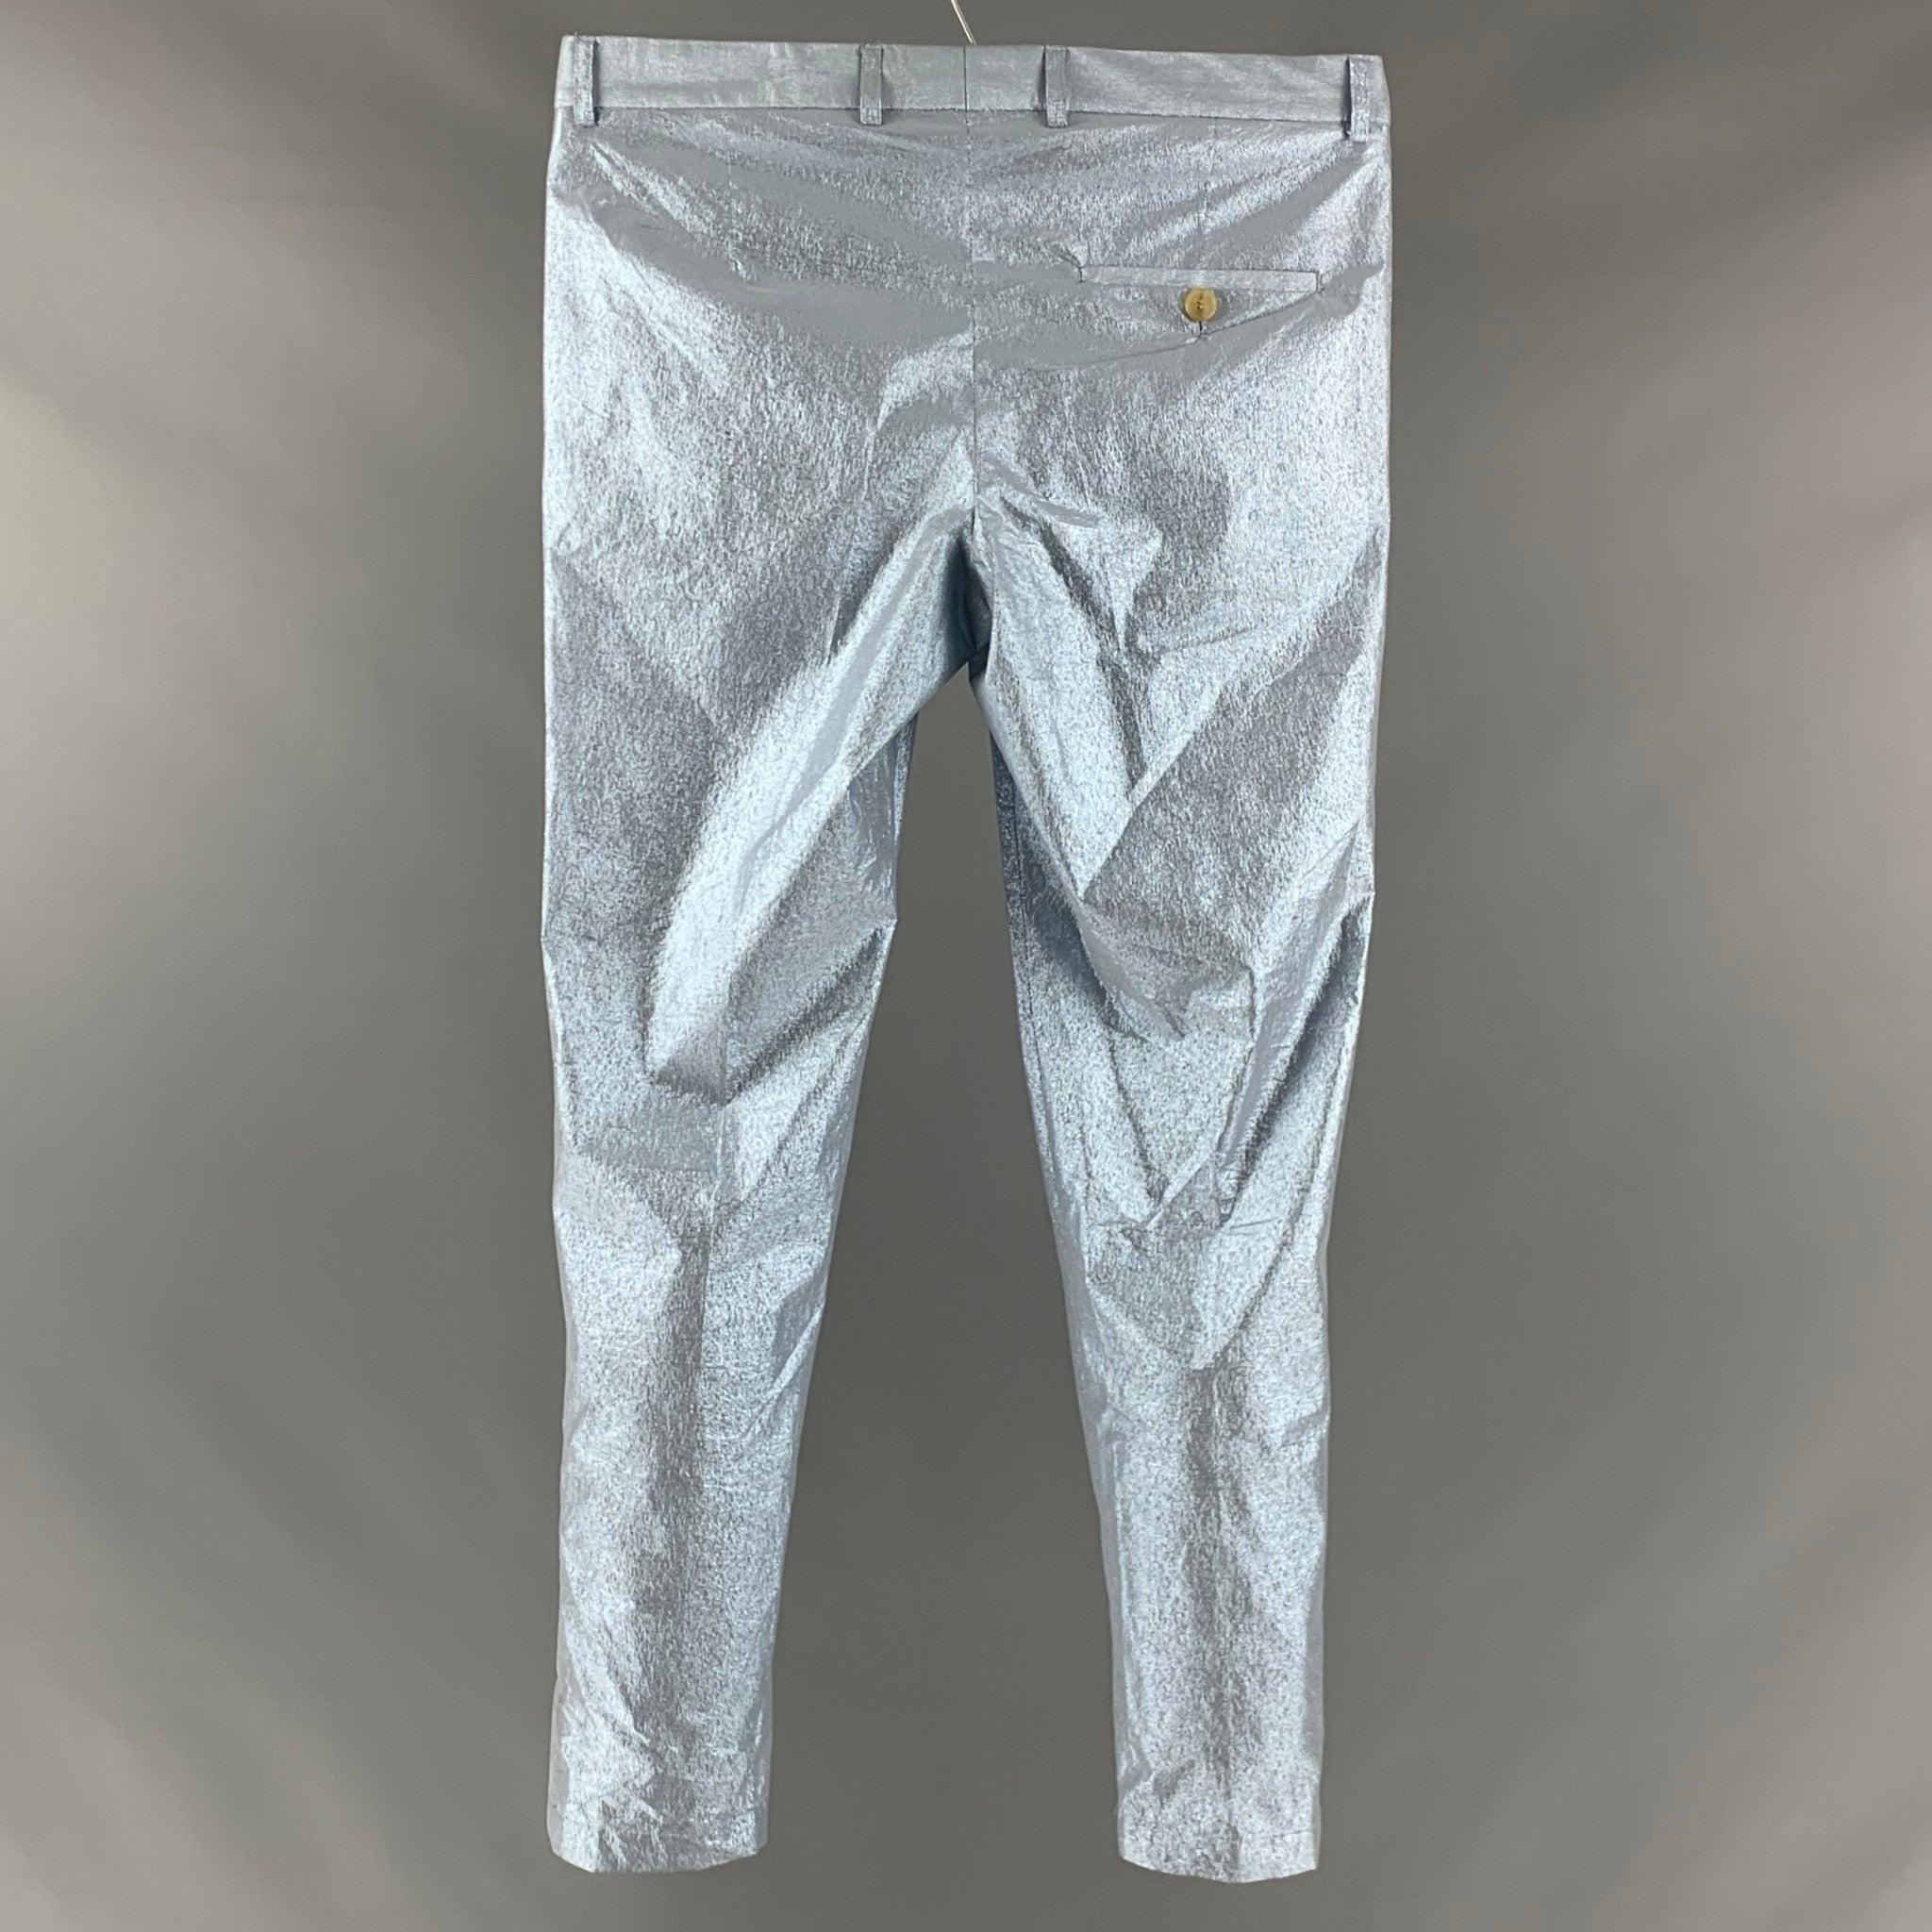 WALTER VAN BEIRENDONCK dress pants comes in a light blue polyamide blend woven material featuring a regular fit, flat front, silver shiny look, and a button zipper fly closure. Made in Italy.Very Good Pre- Owned Conditions. Minor mark at left side.